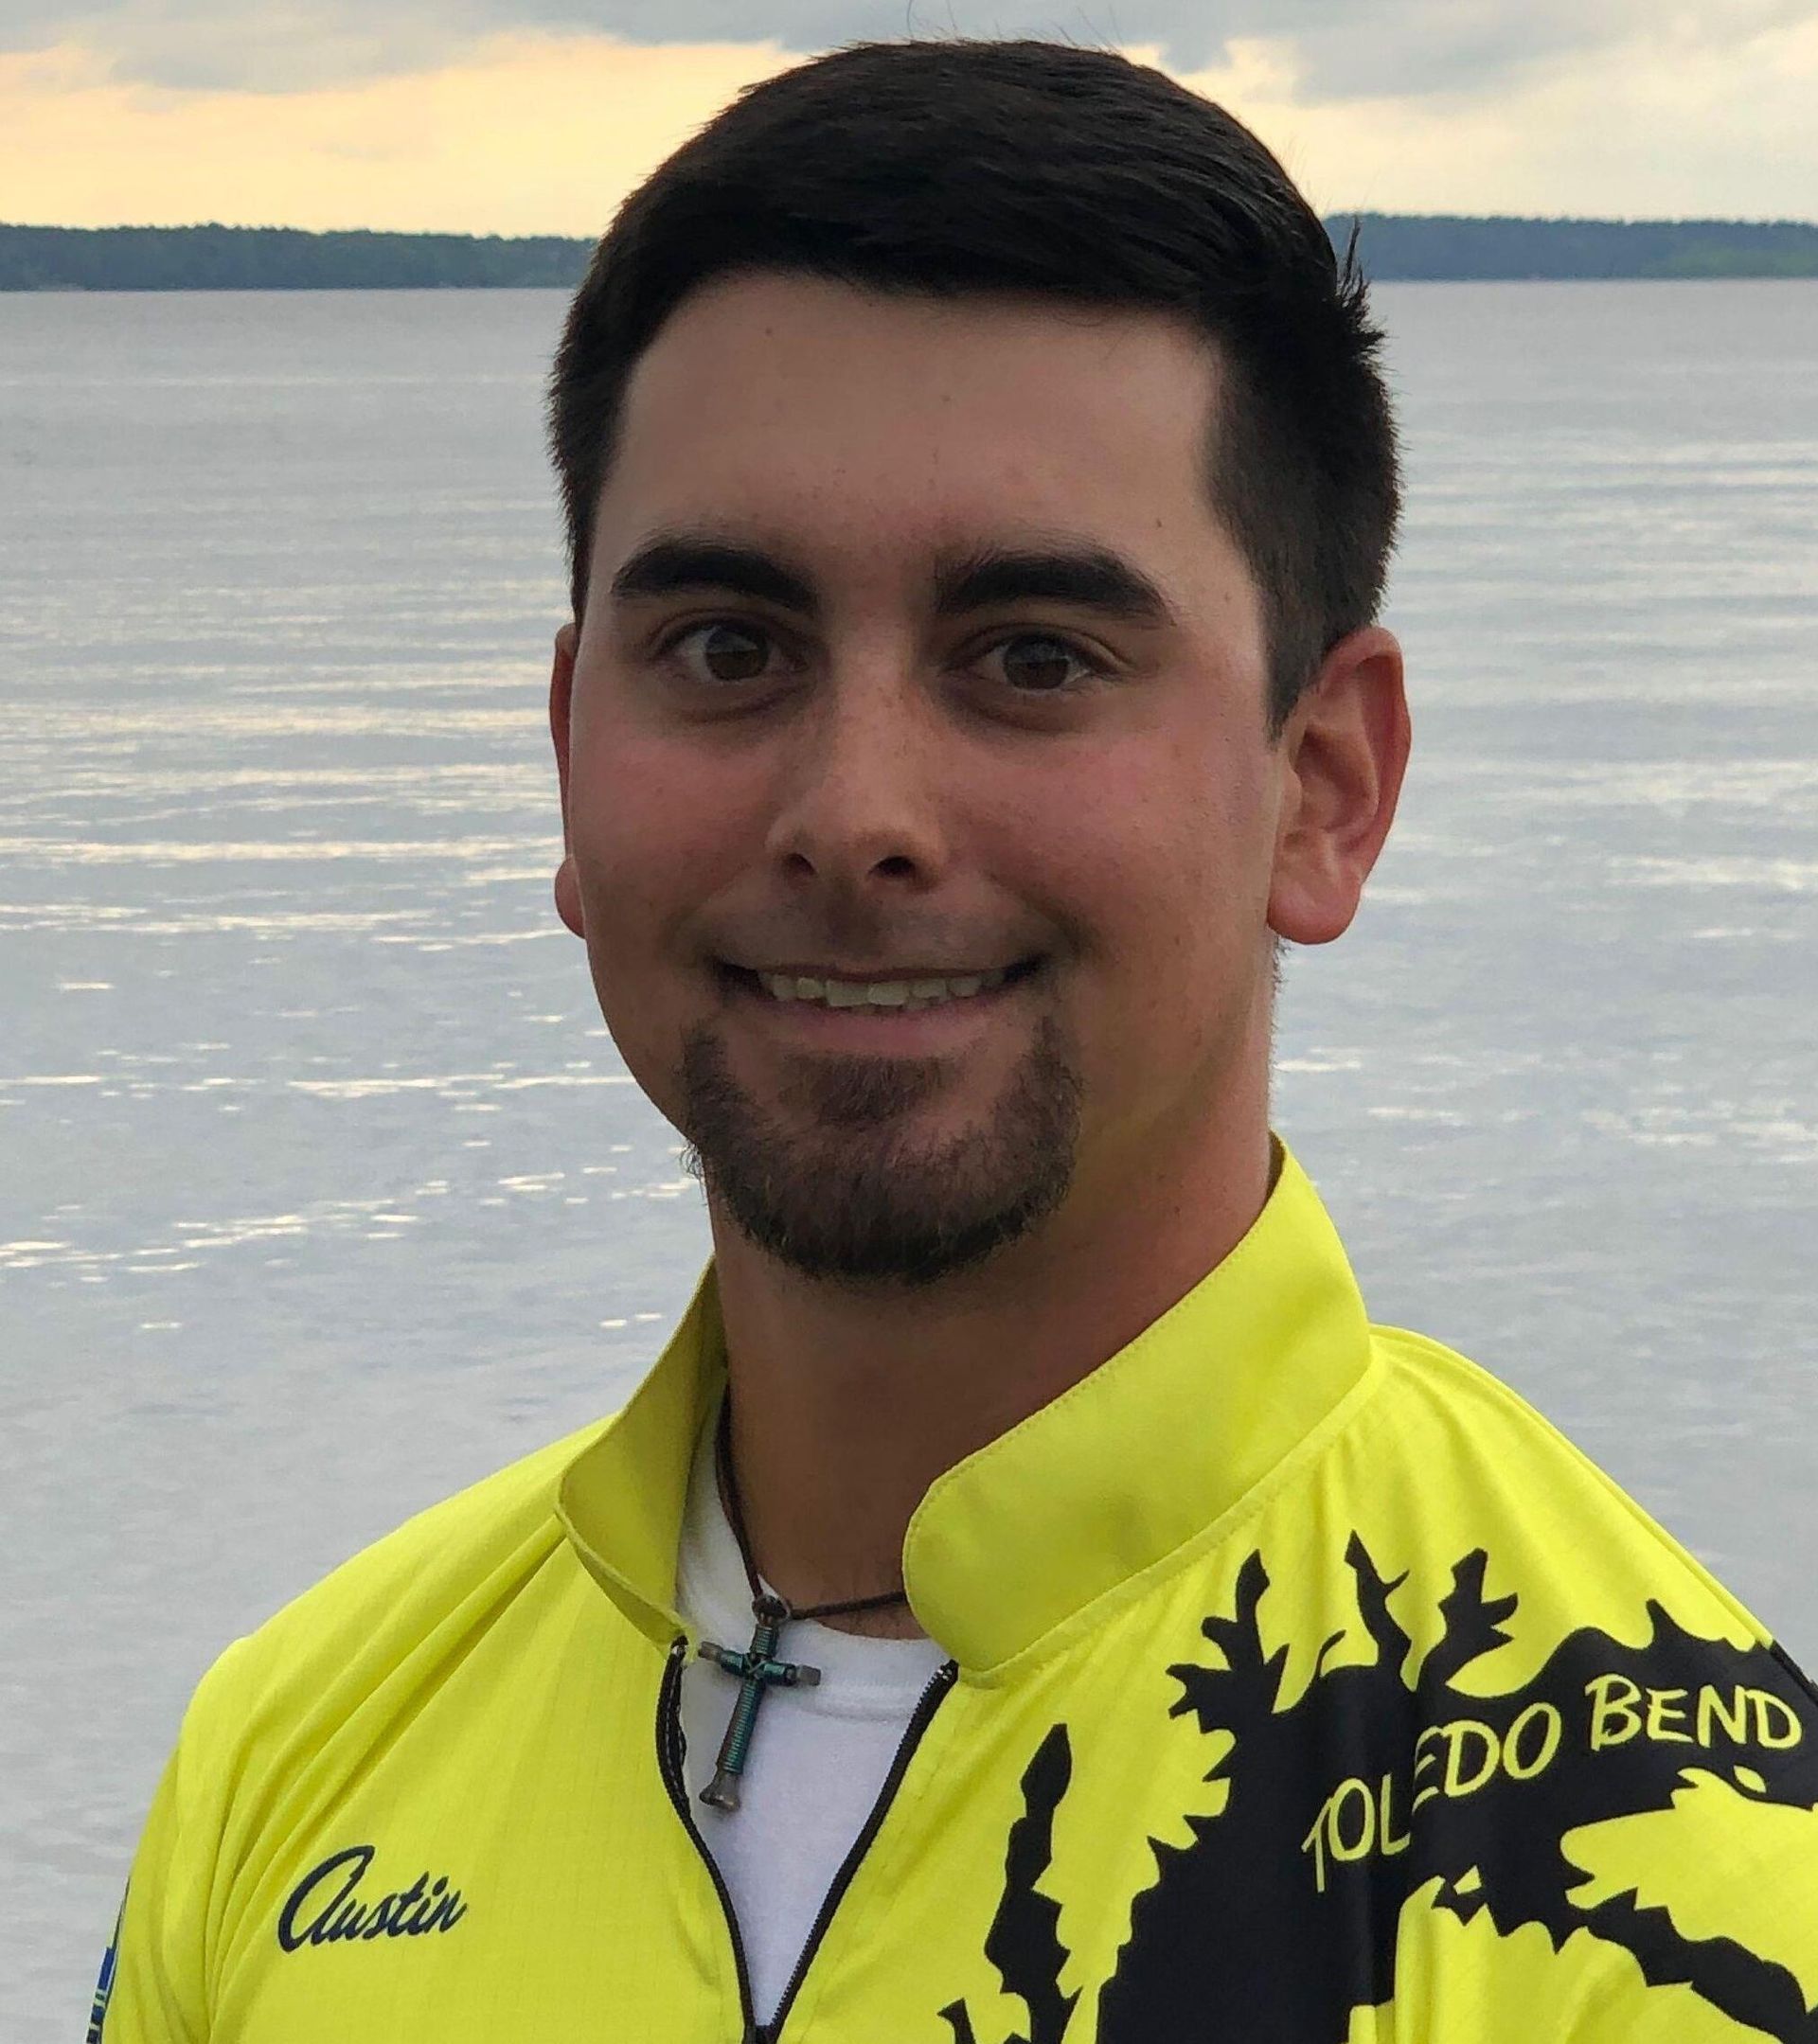 a man wearing a yellow toledo bend shirt smiles for the camera